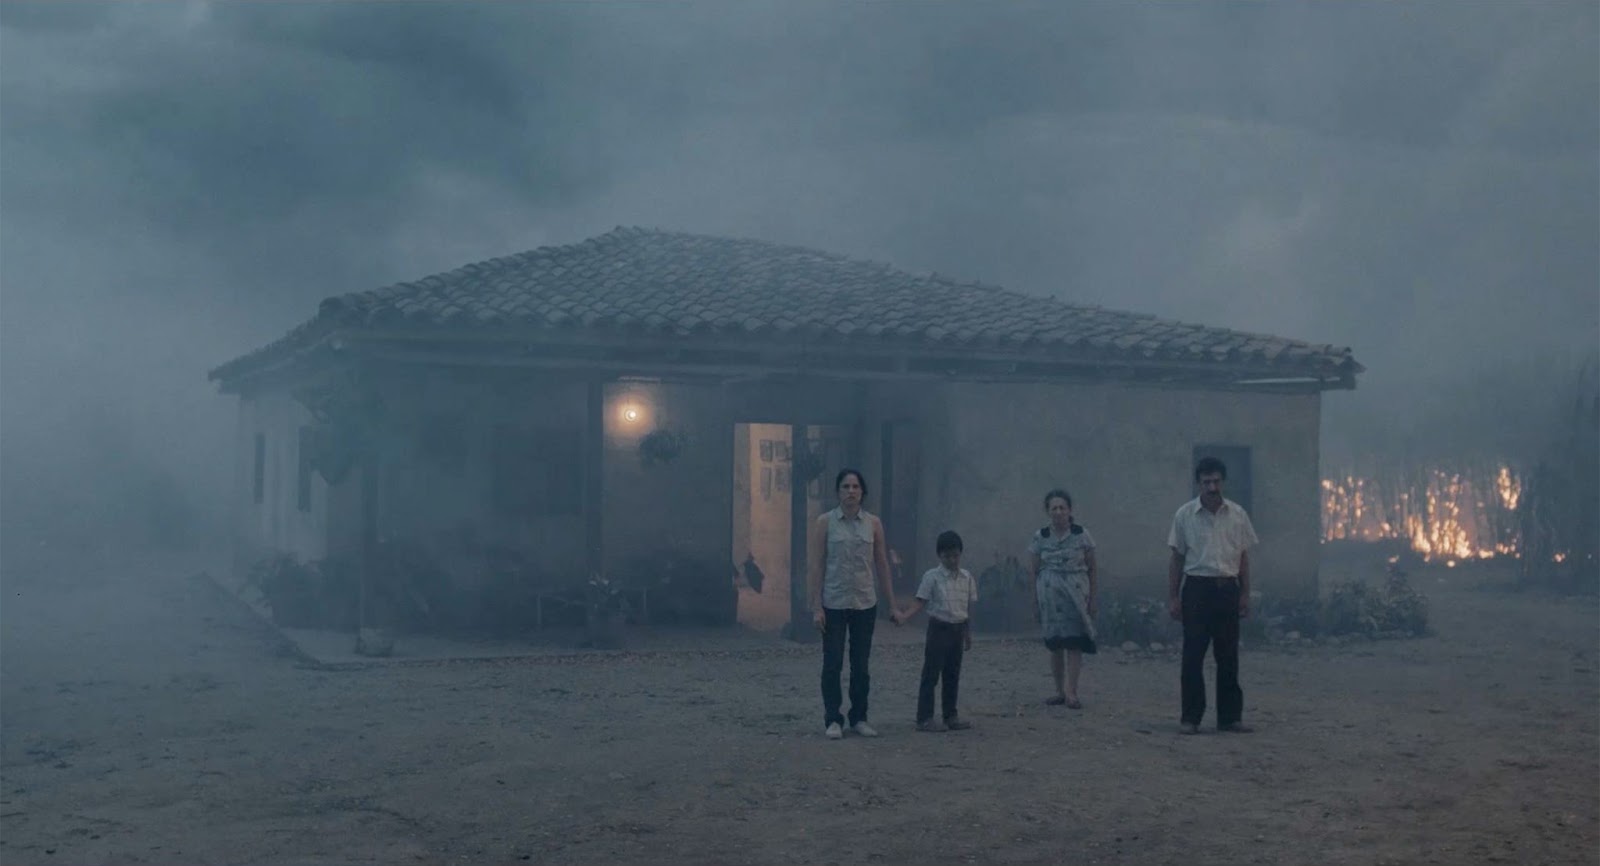 A still from 'Land and Shade' (2015), a family standing outside a house enflamed in smoke. 